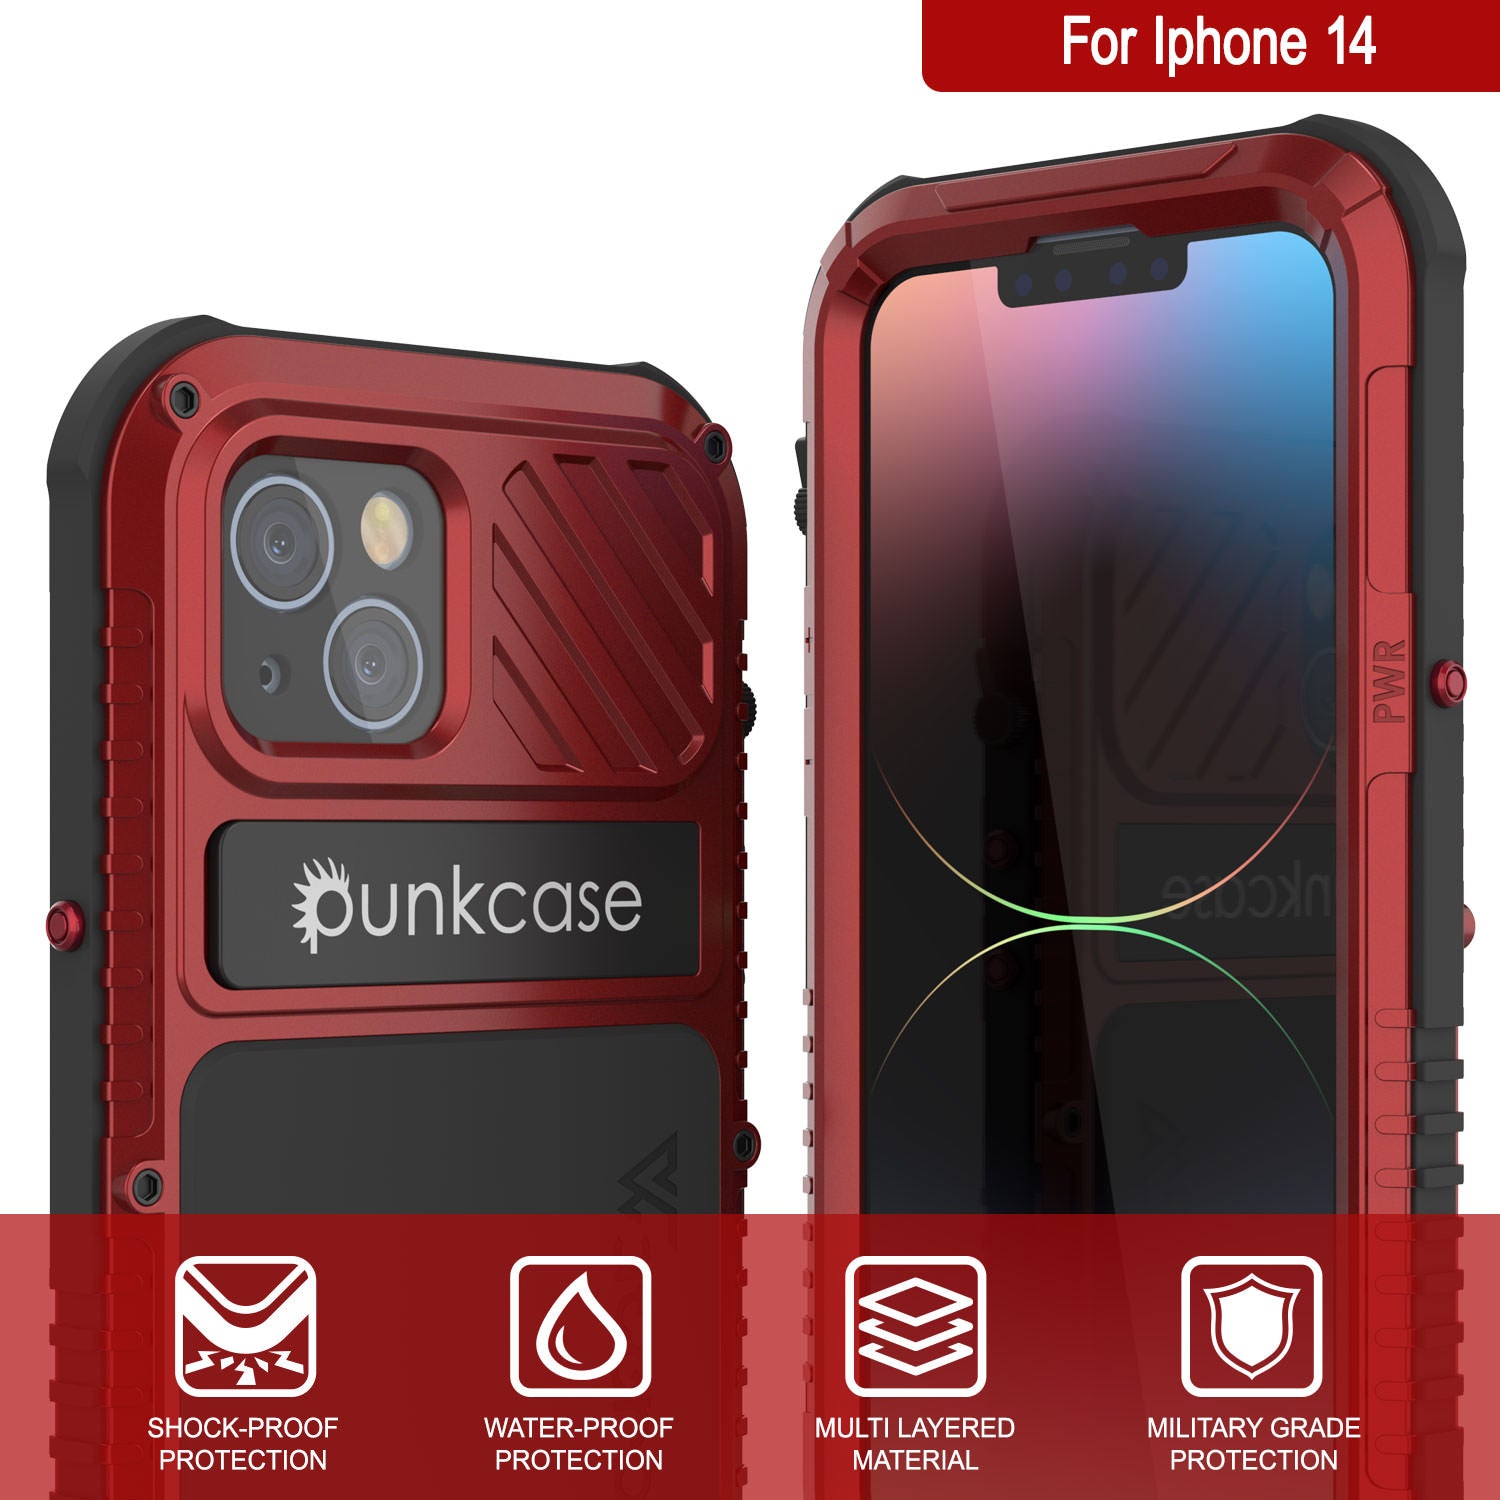 iPhone 12 Pro Max Metal Case, Heavy Duty Military Grade Armor Cover [shock  proof] Full Body Hard [Red]